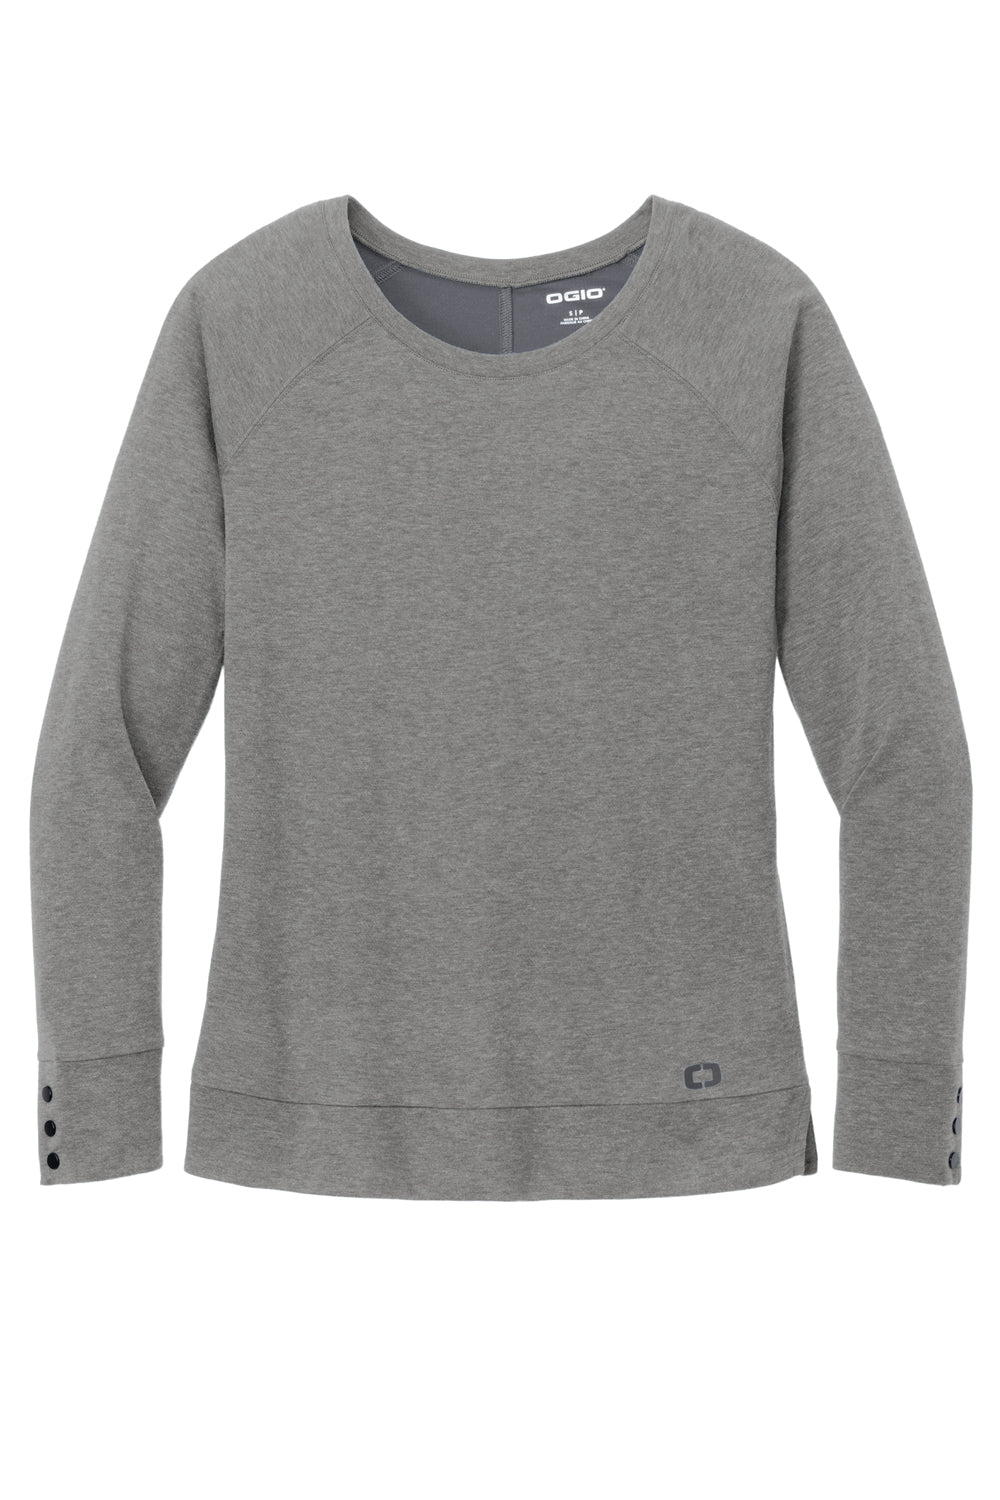 Ogio Womens Command Long Sleeve Scoop Neck T-Shirt Gear Grey Flat Front